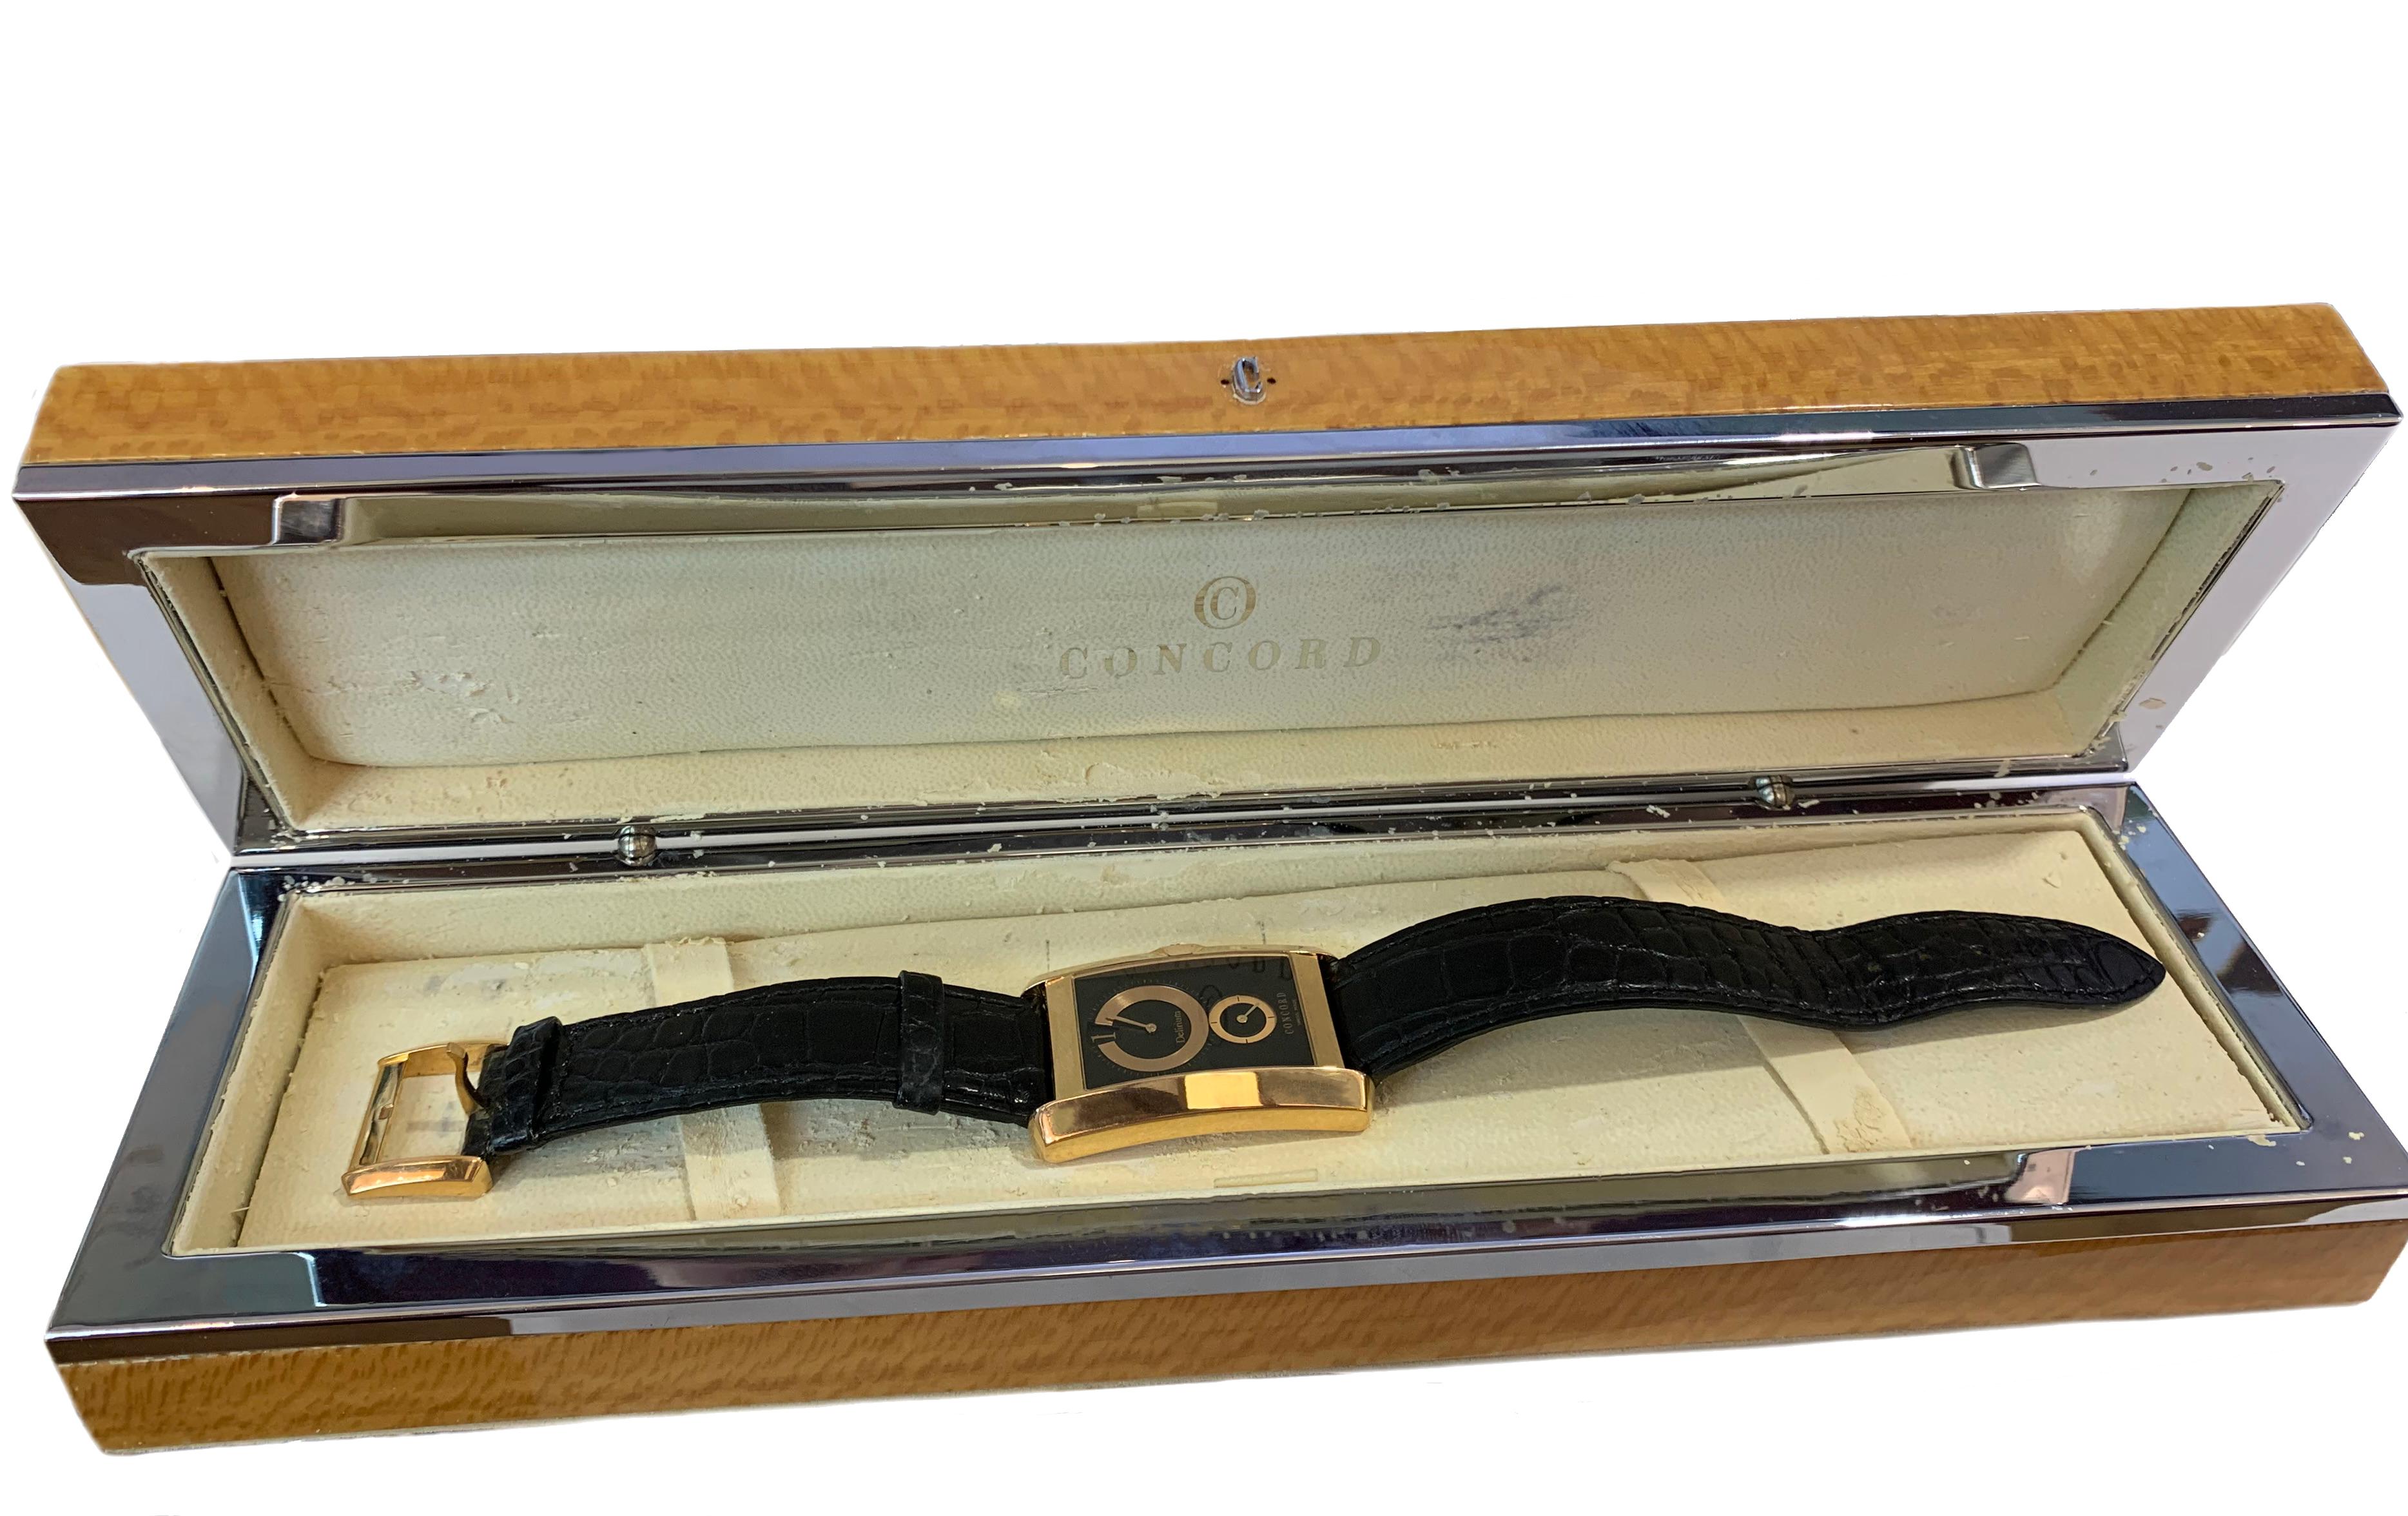 -Good condition case, strap shows signs of wear
-Case material: 18k Rose Gold
-Movement: Manual Wind Movement
-Case Size: 28mm x 43mm
-Dial: Black jump hour dial
-Black leather strap